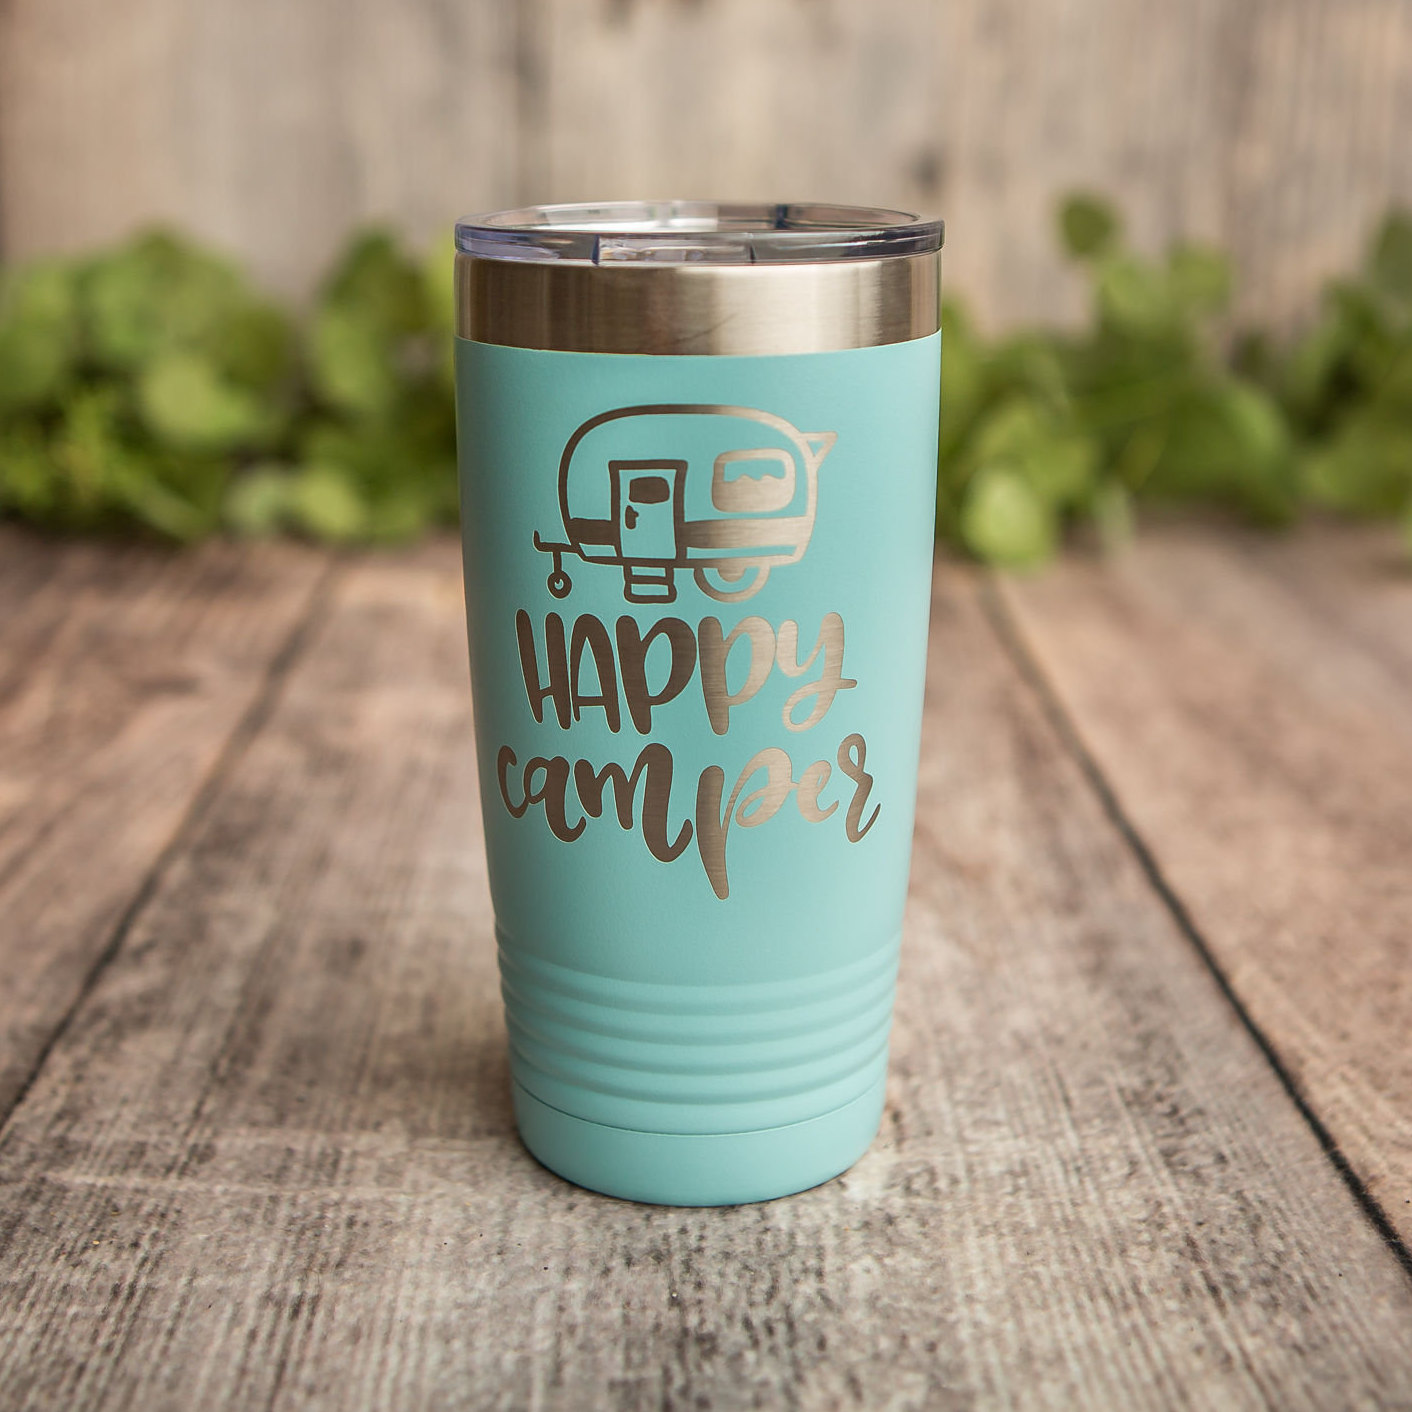 Happy Camper - Engraved Stainless Steel Tumbler, Yeti Style Cup, Happy  Camper Cup